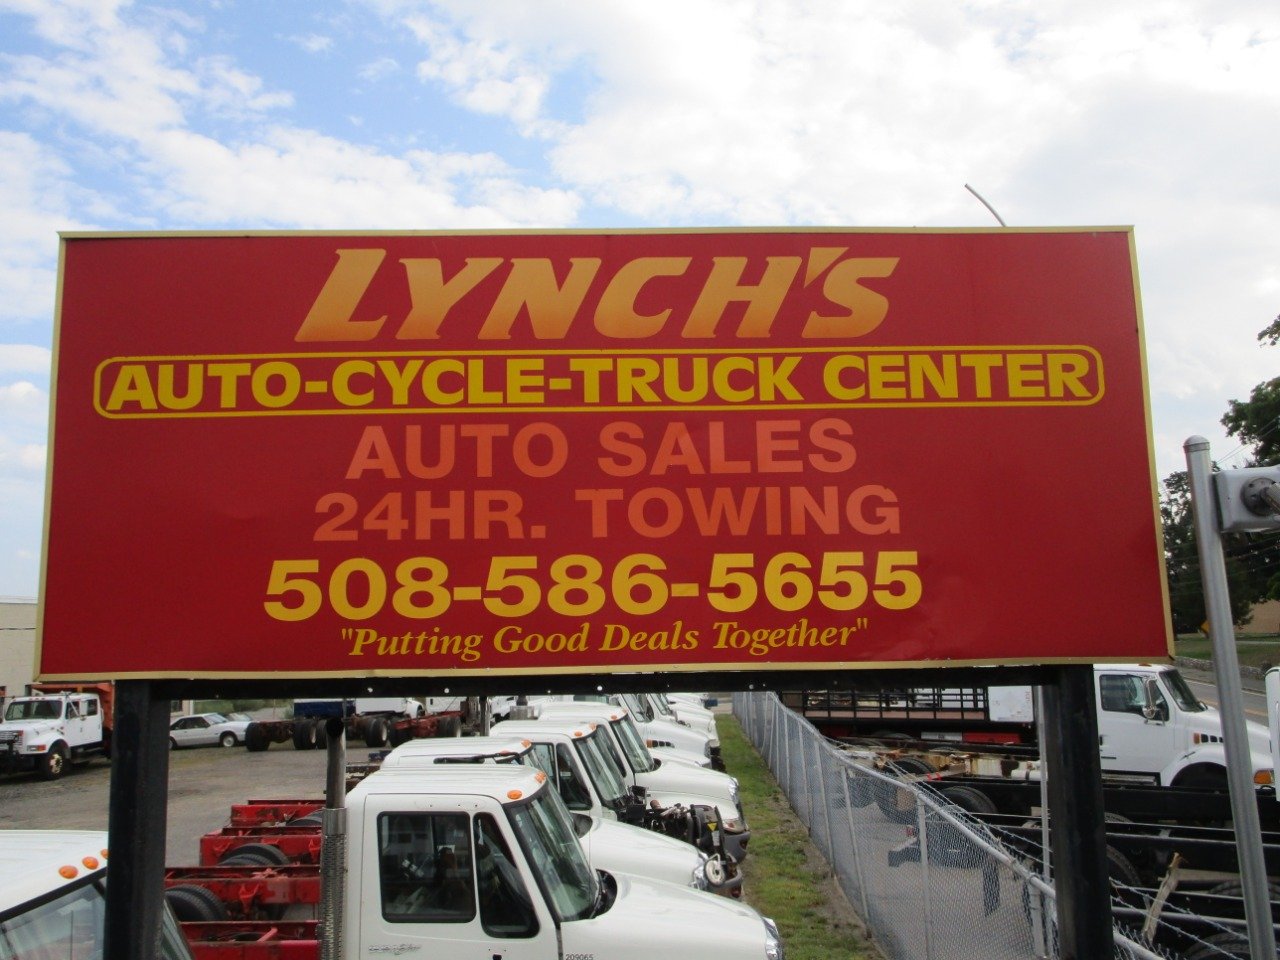 Lynch's Auto - Cycle - Truck Center